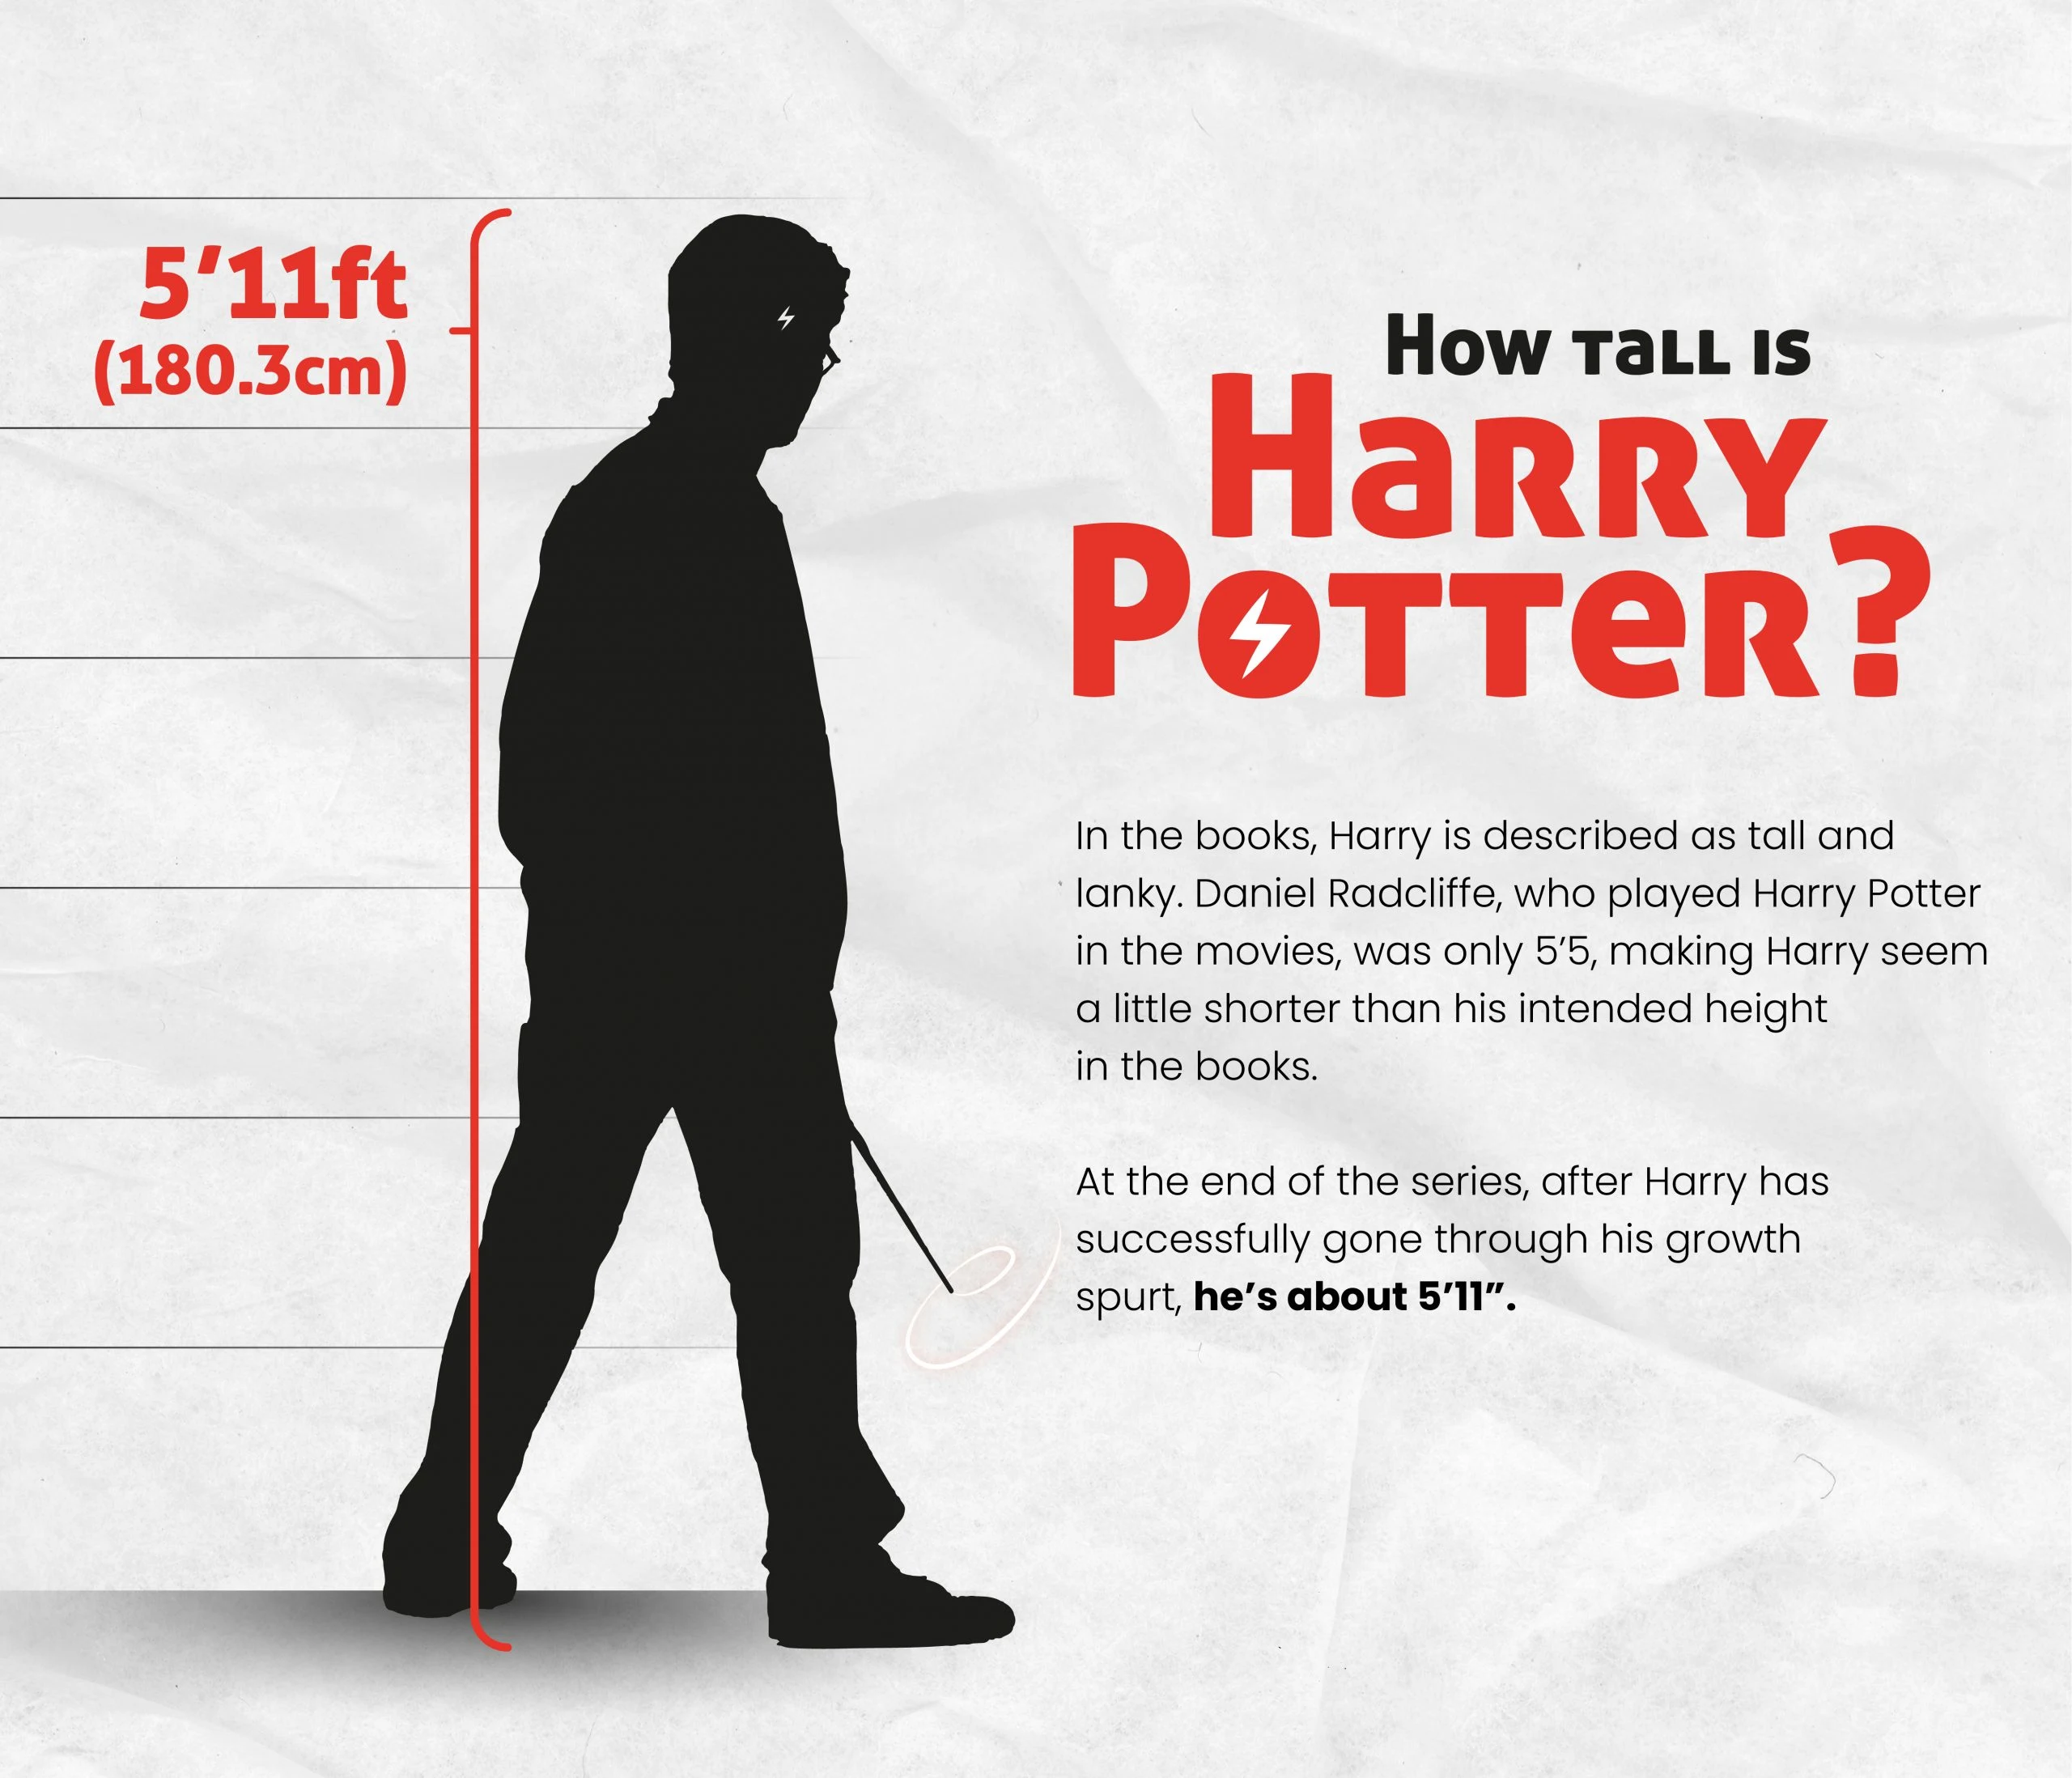 How Tall is Harry Potter